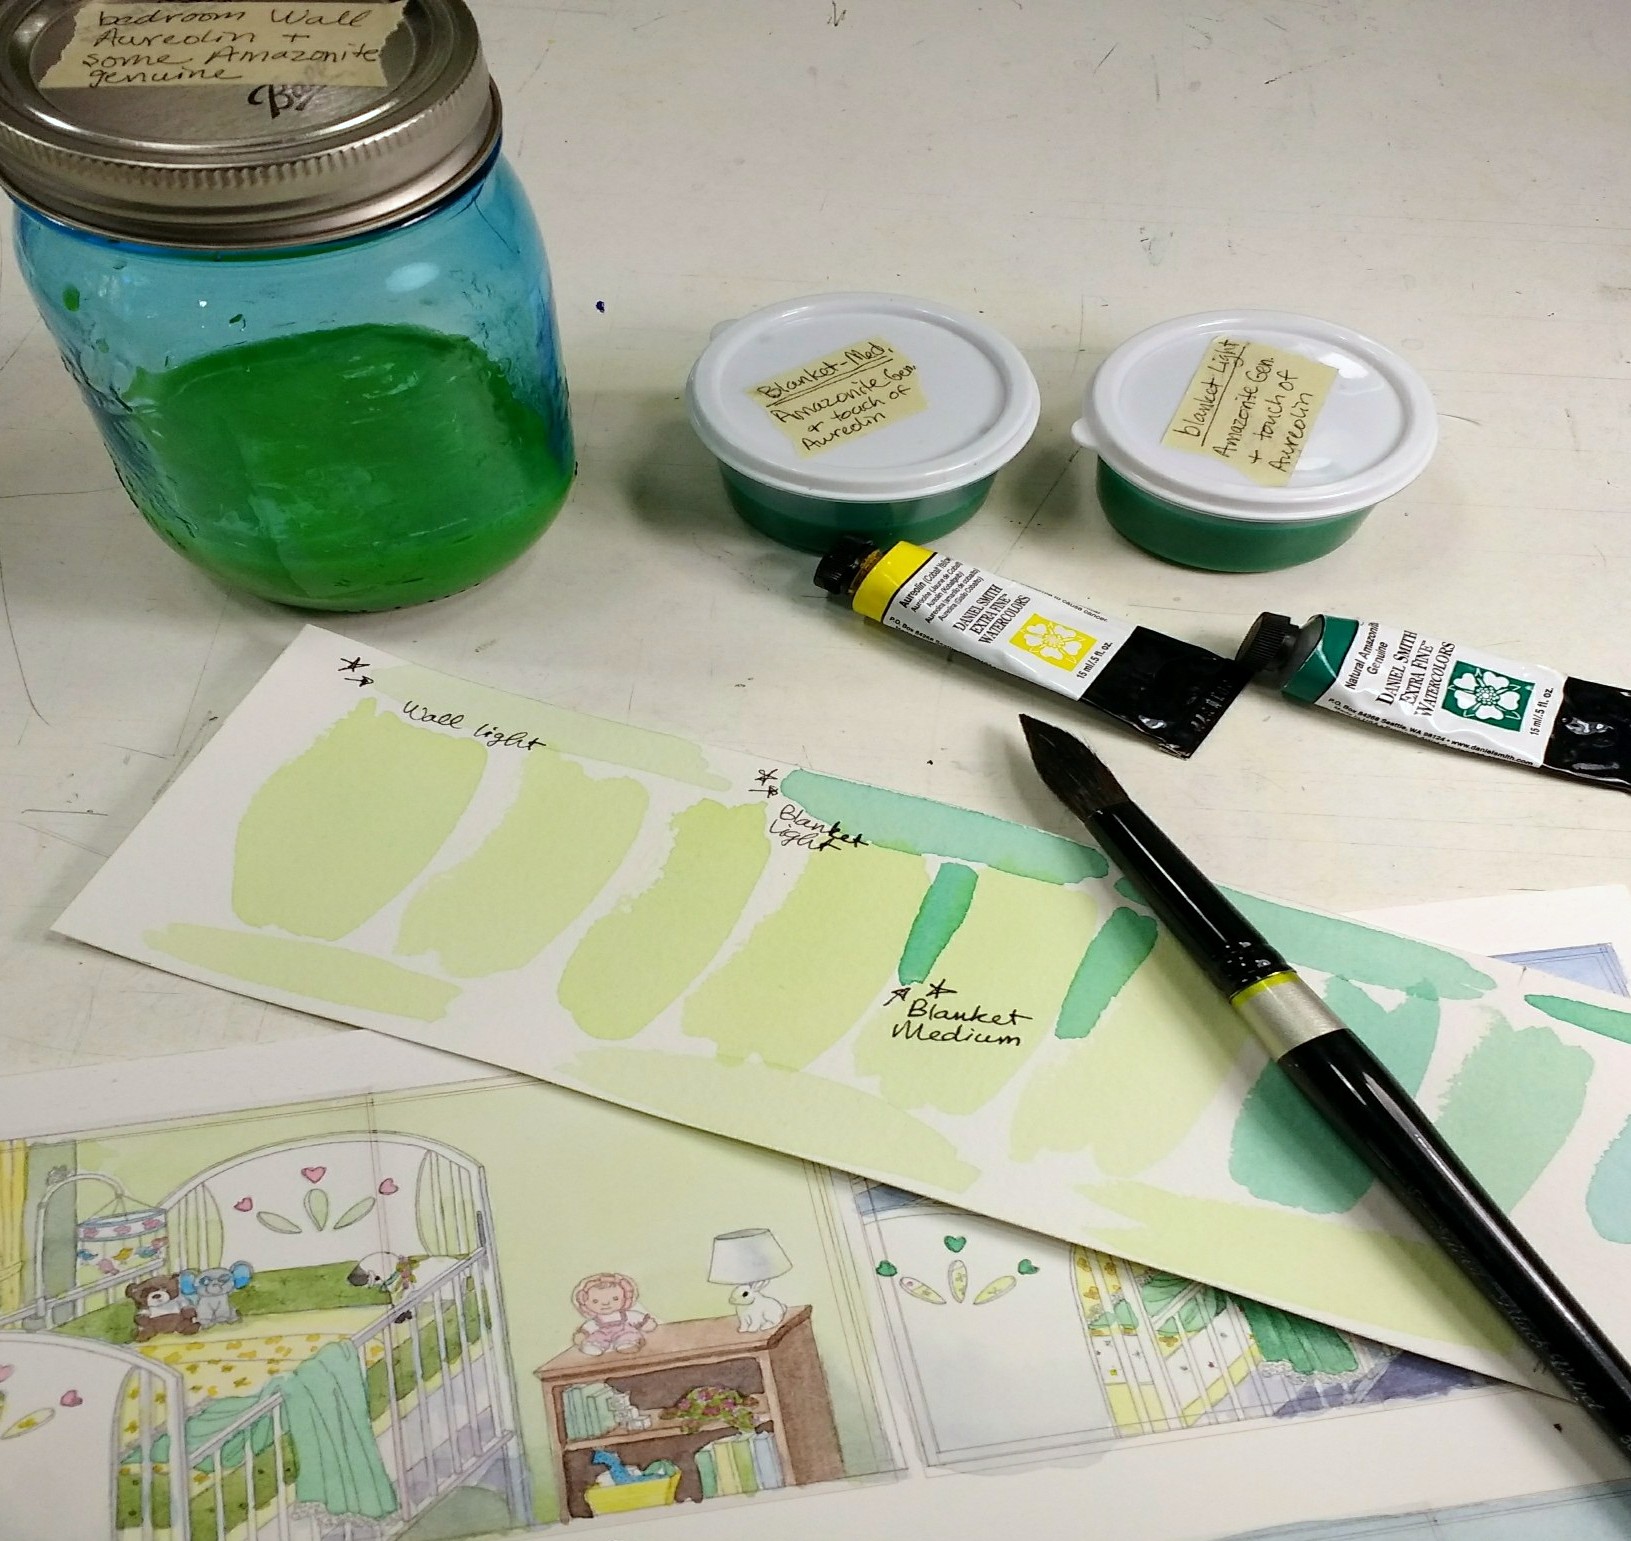 How to produce a children's book - Painting With Watercolors